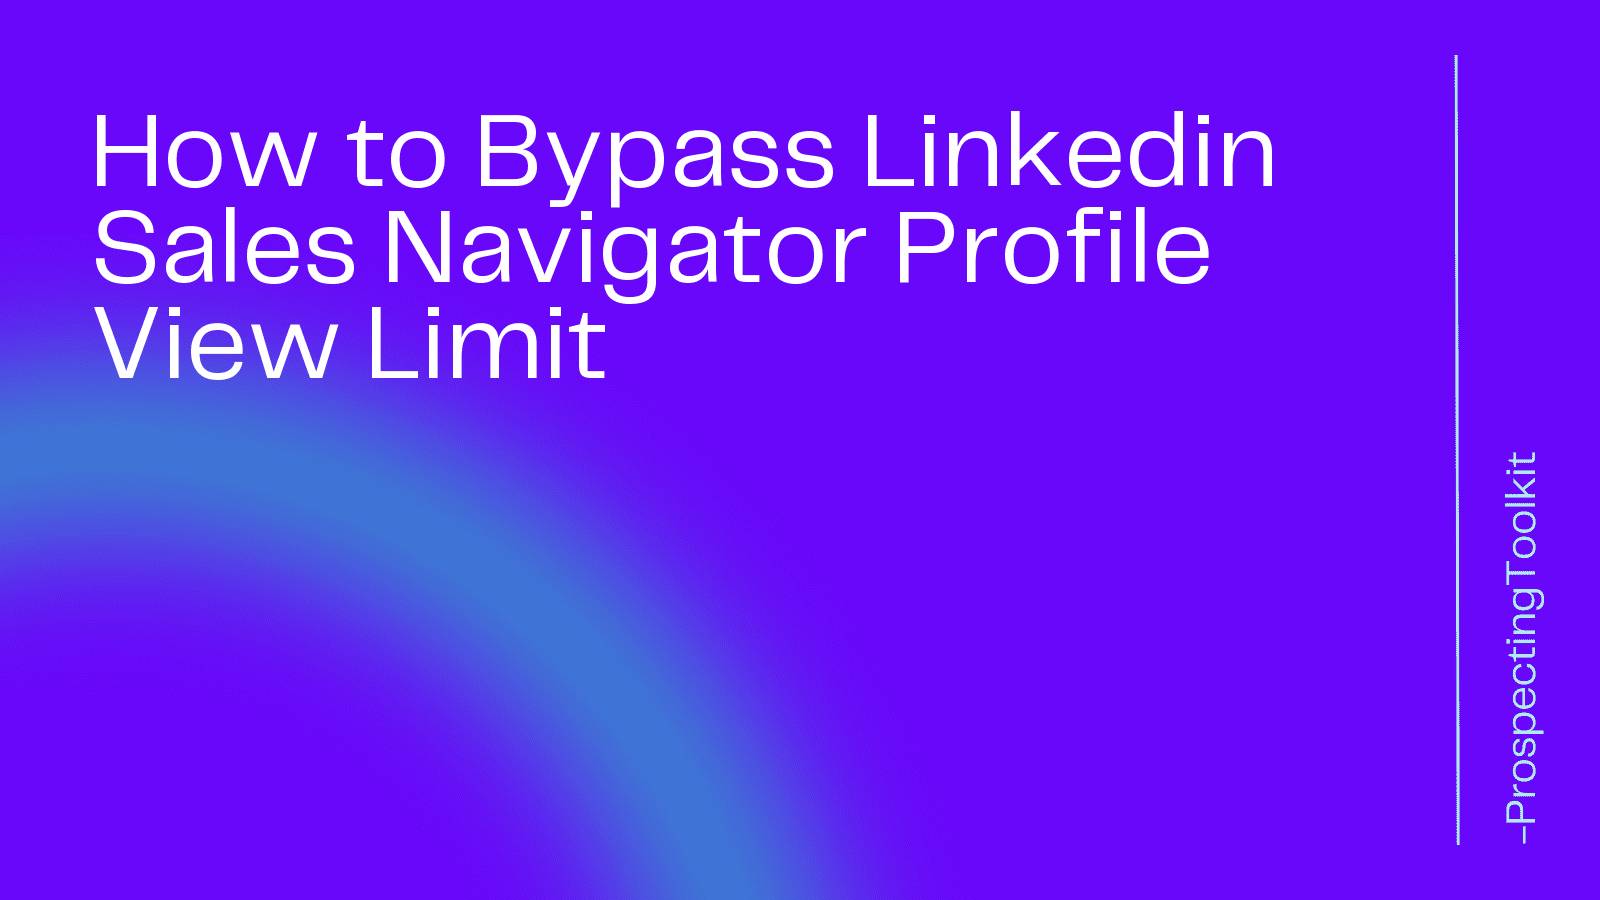 How to Bypass Linkedin Sales Navigator Profile View Limit